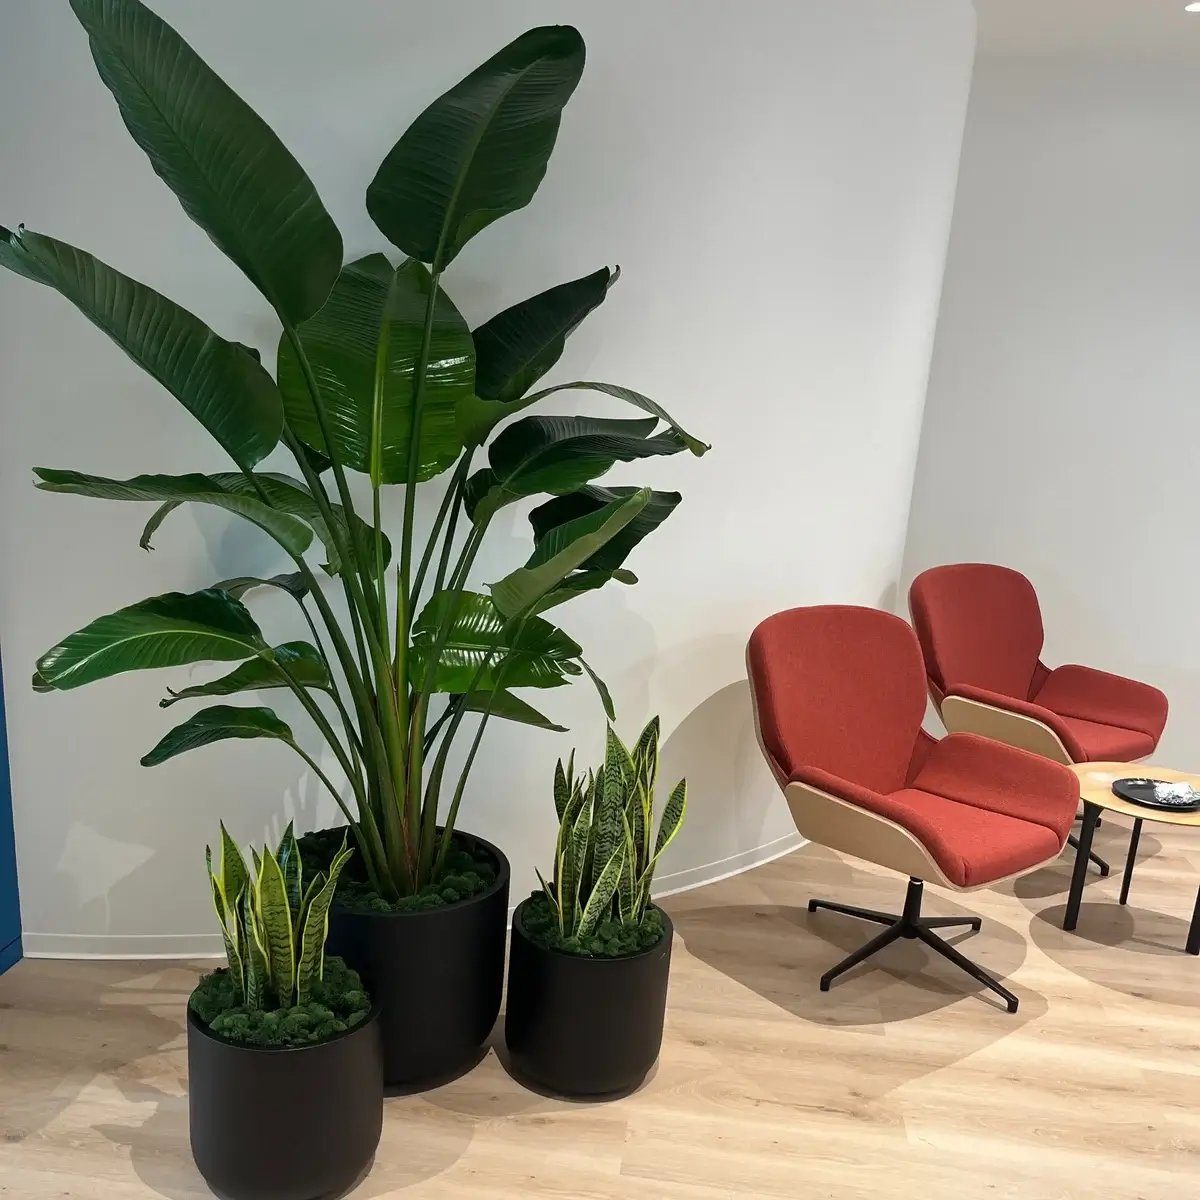 lobby space with potted plants